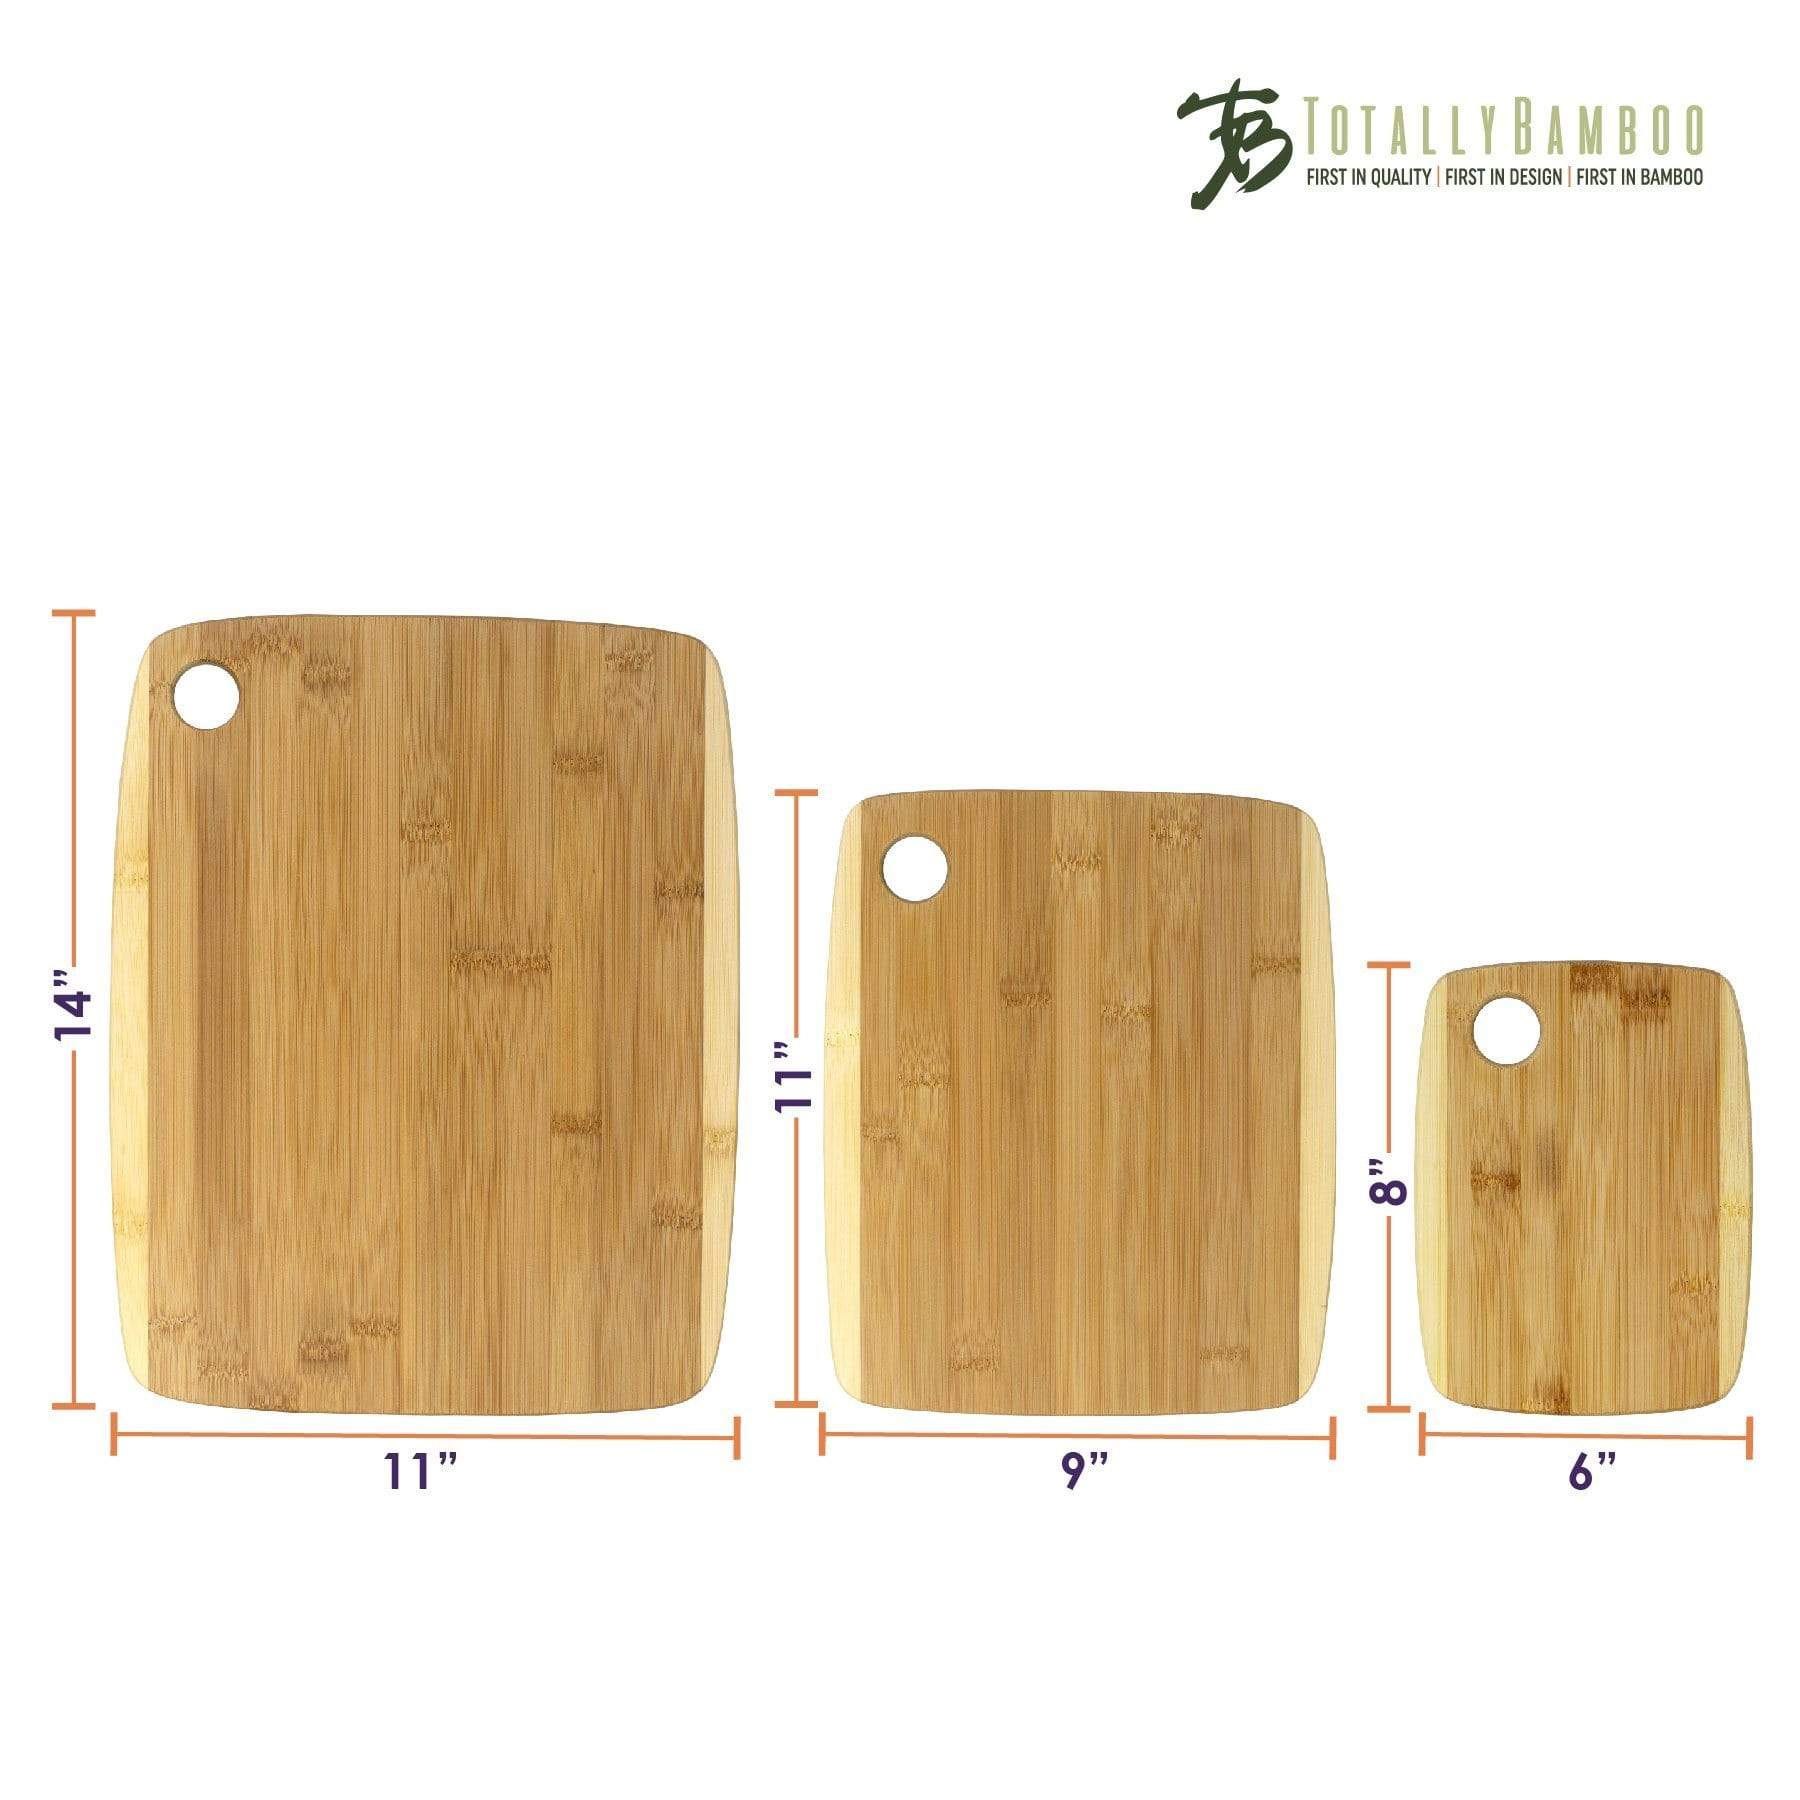 https://totallybamboo.com/cdn/shop/products/3-piece-two-tone-bamboo-serving-and-cutting-board-set-totally-bamboo-844581.jpg?v=1628142538